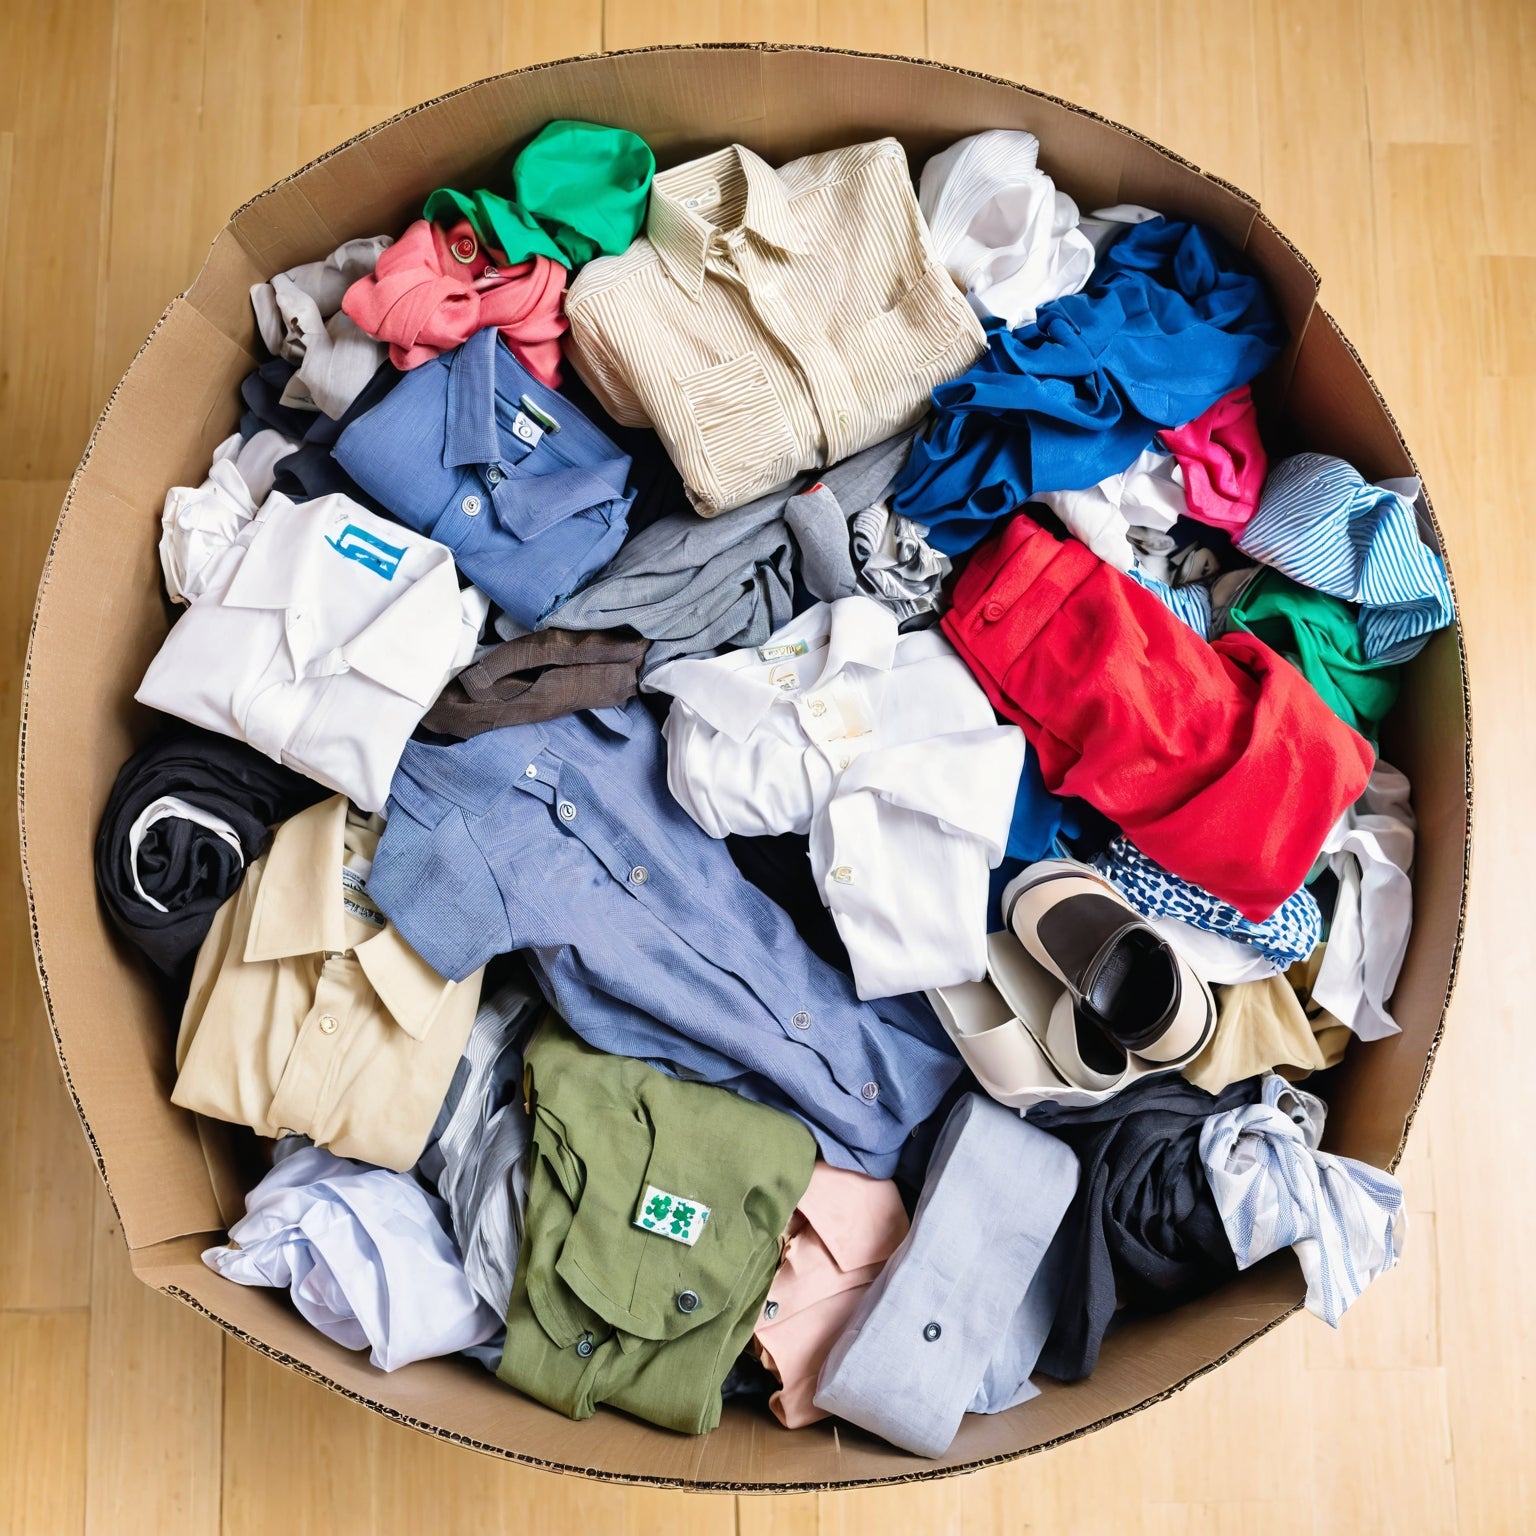 The best way to reduce your carbon footprint is to recycle your clothes